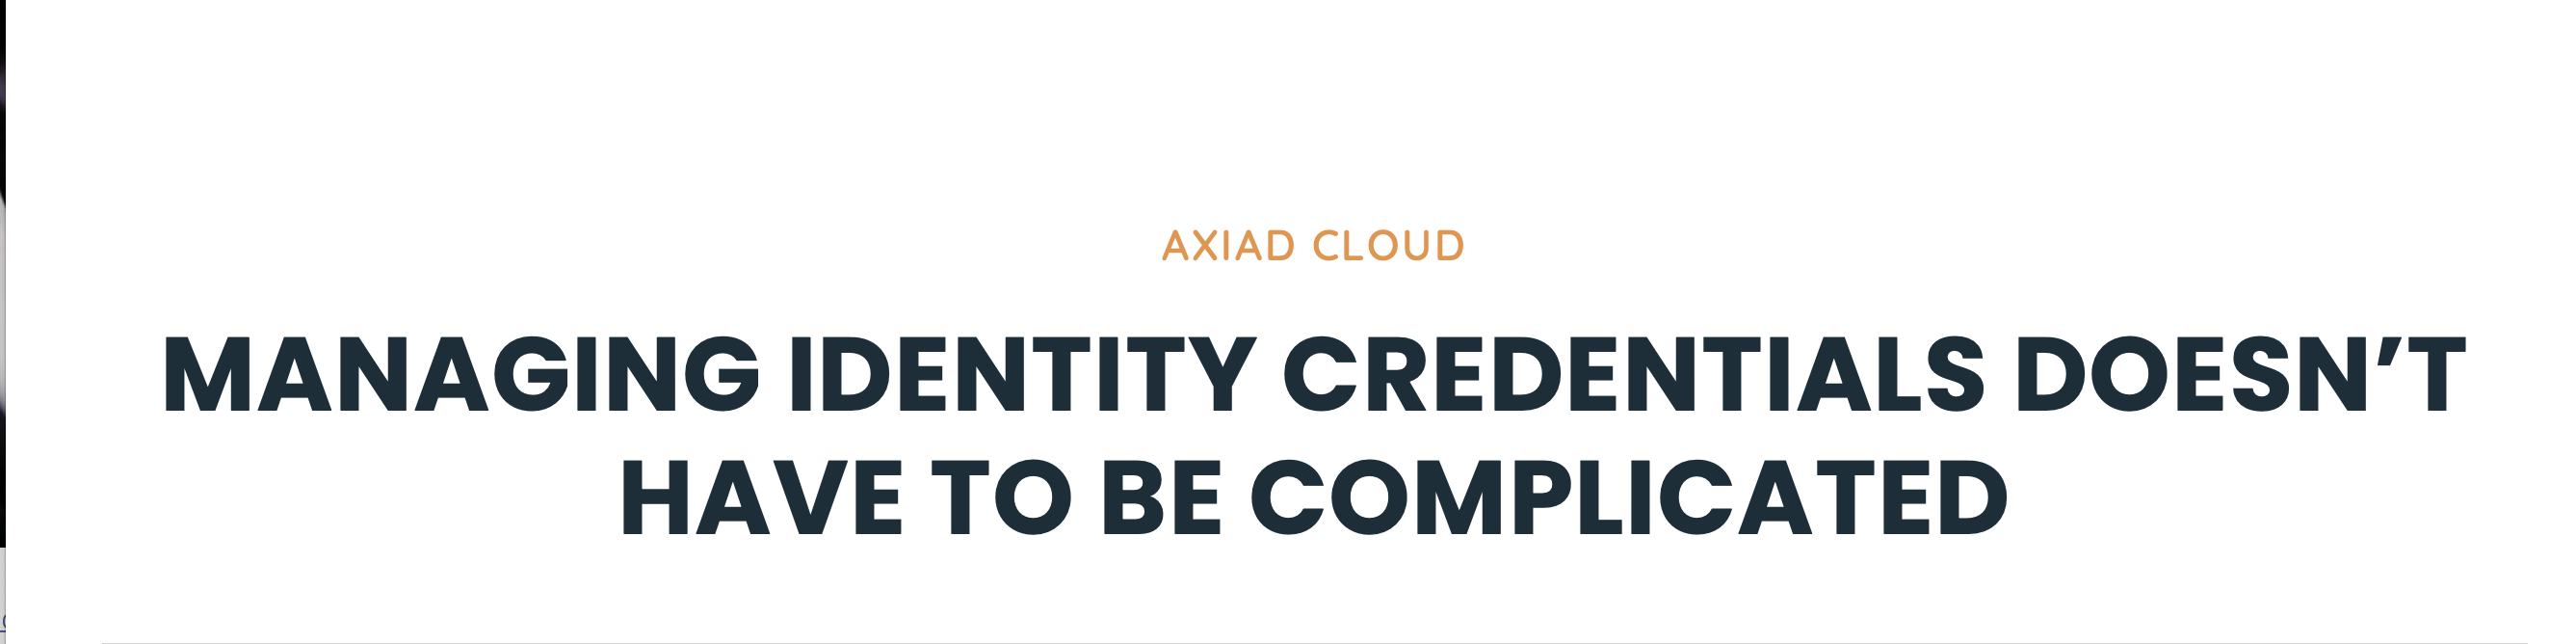 Managing Identity Credentials Doesn't Have to Be Complicated